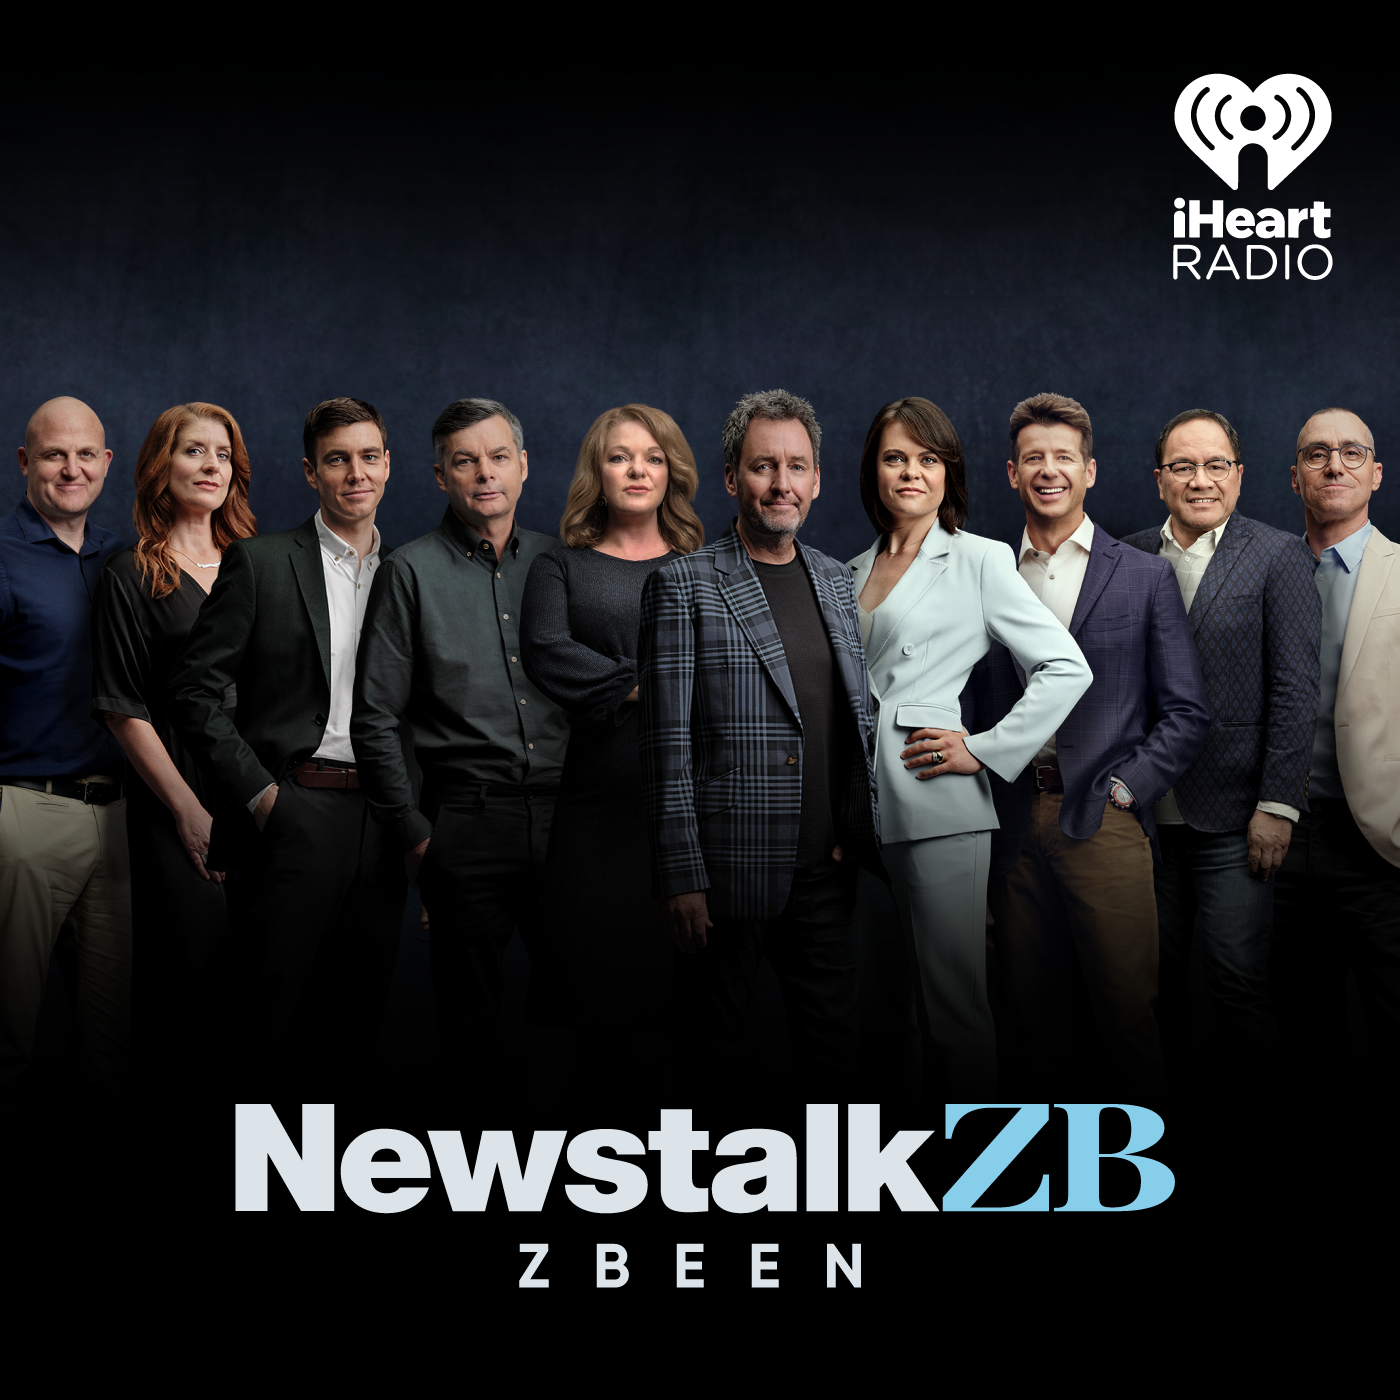 NEWSTALK ZBEEN: Central Bails Out Local